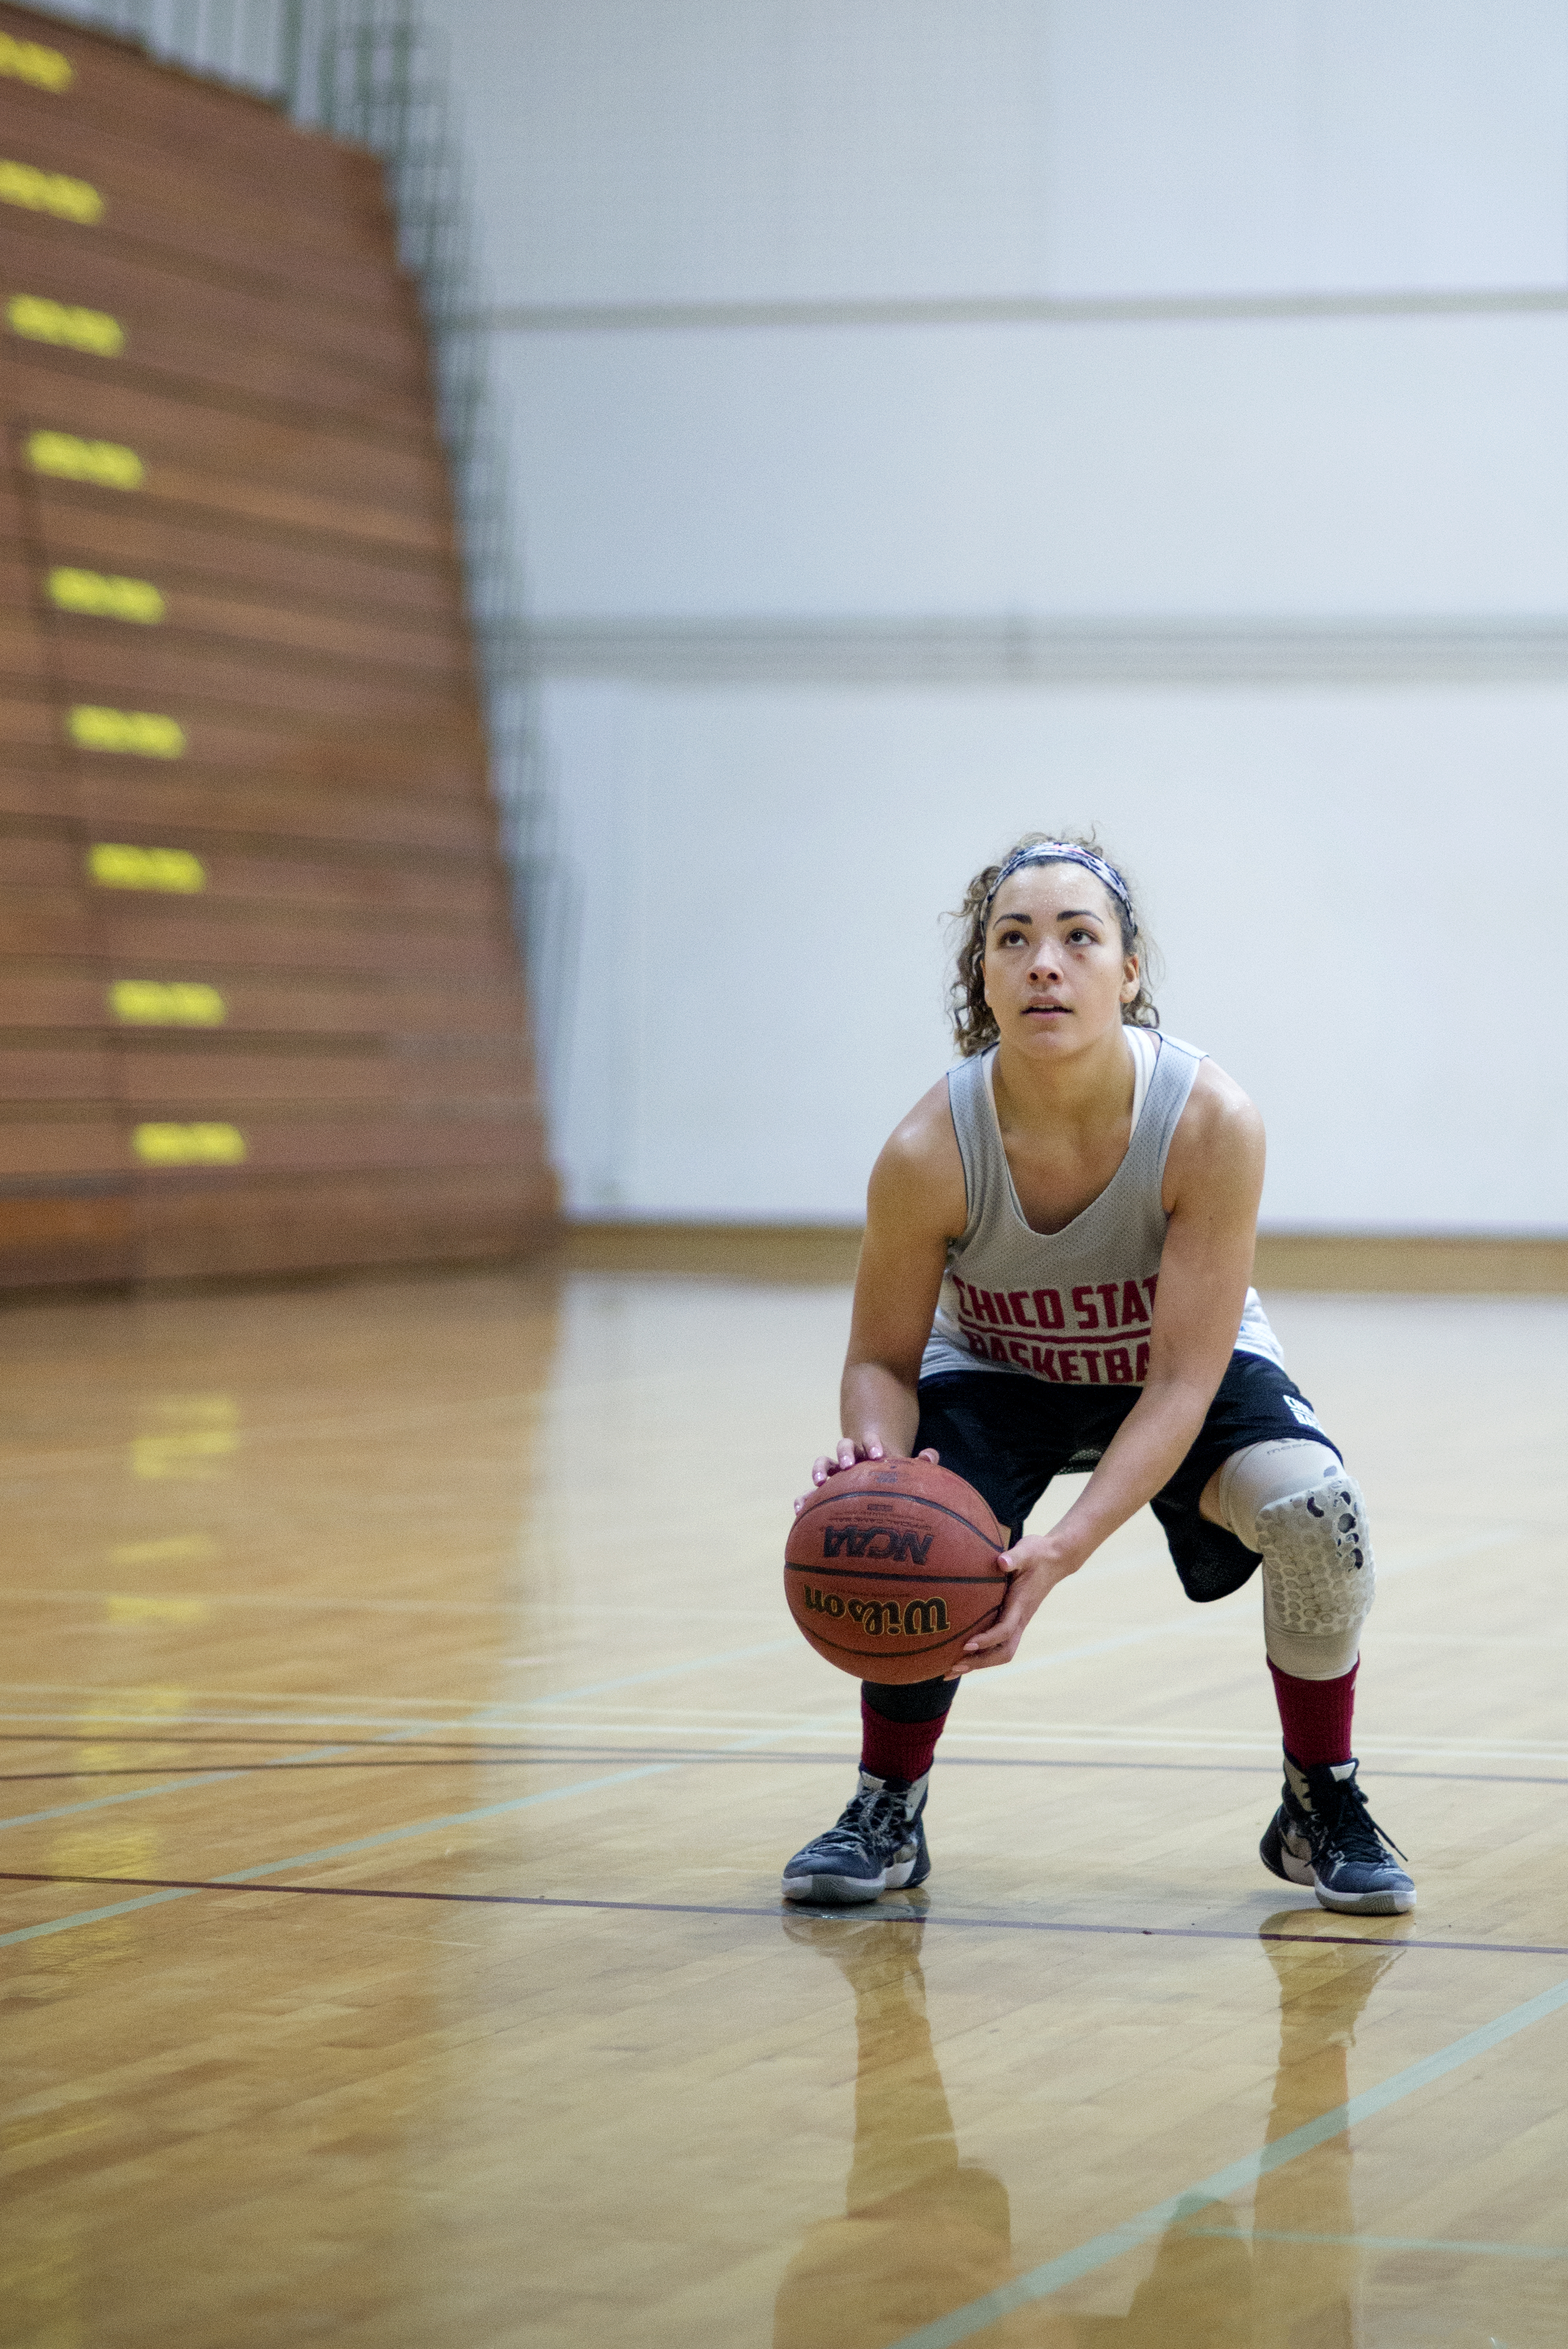 Chico State women's basketball player Whitney Branham has overcome spina bifida to become the Wildcats' leader on the court.